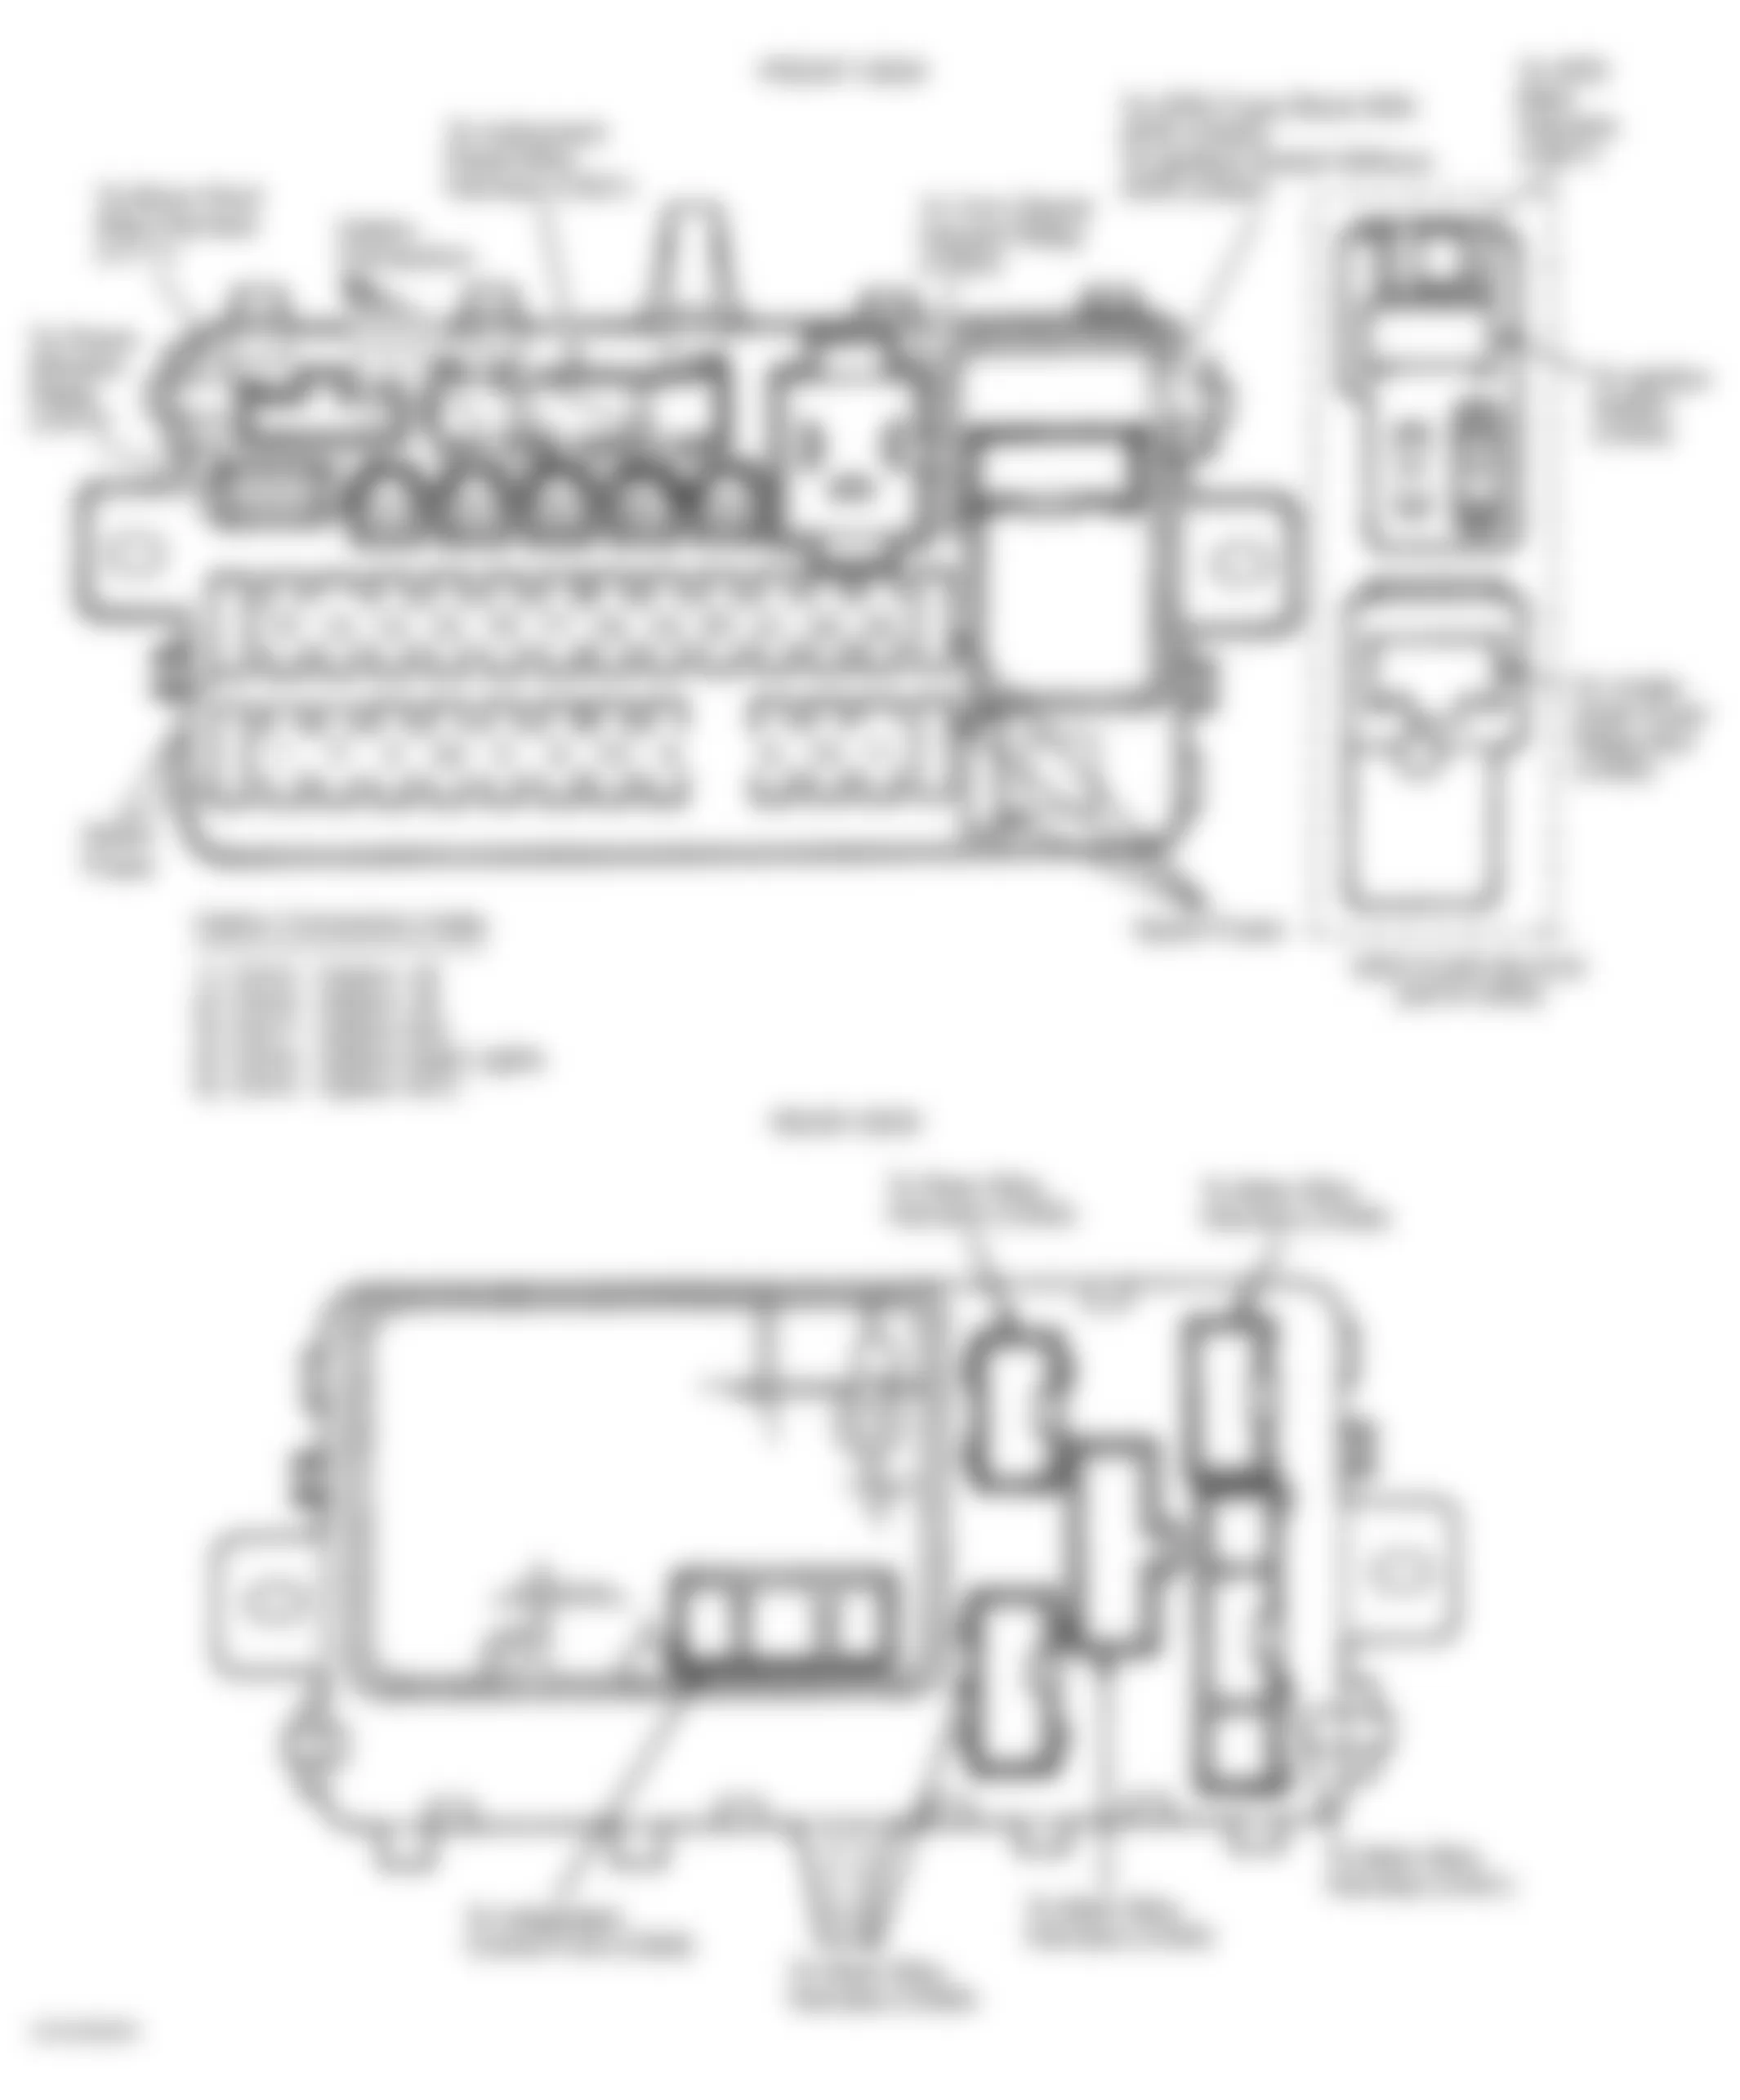 Honda Civic DX 1992 - Component Locations -  Identifying Under-Dash Fuse/Relay Box Components (1994-95 Civic)